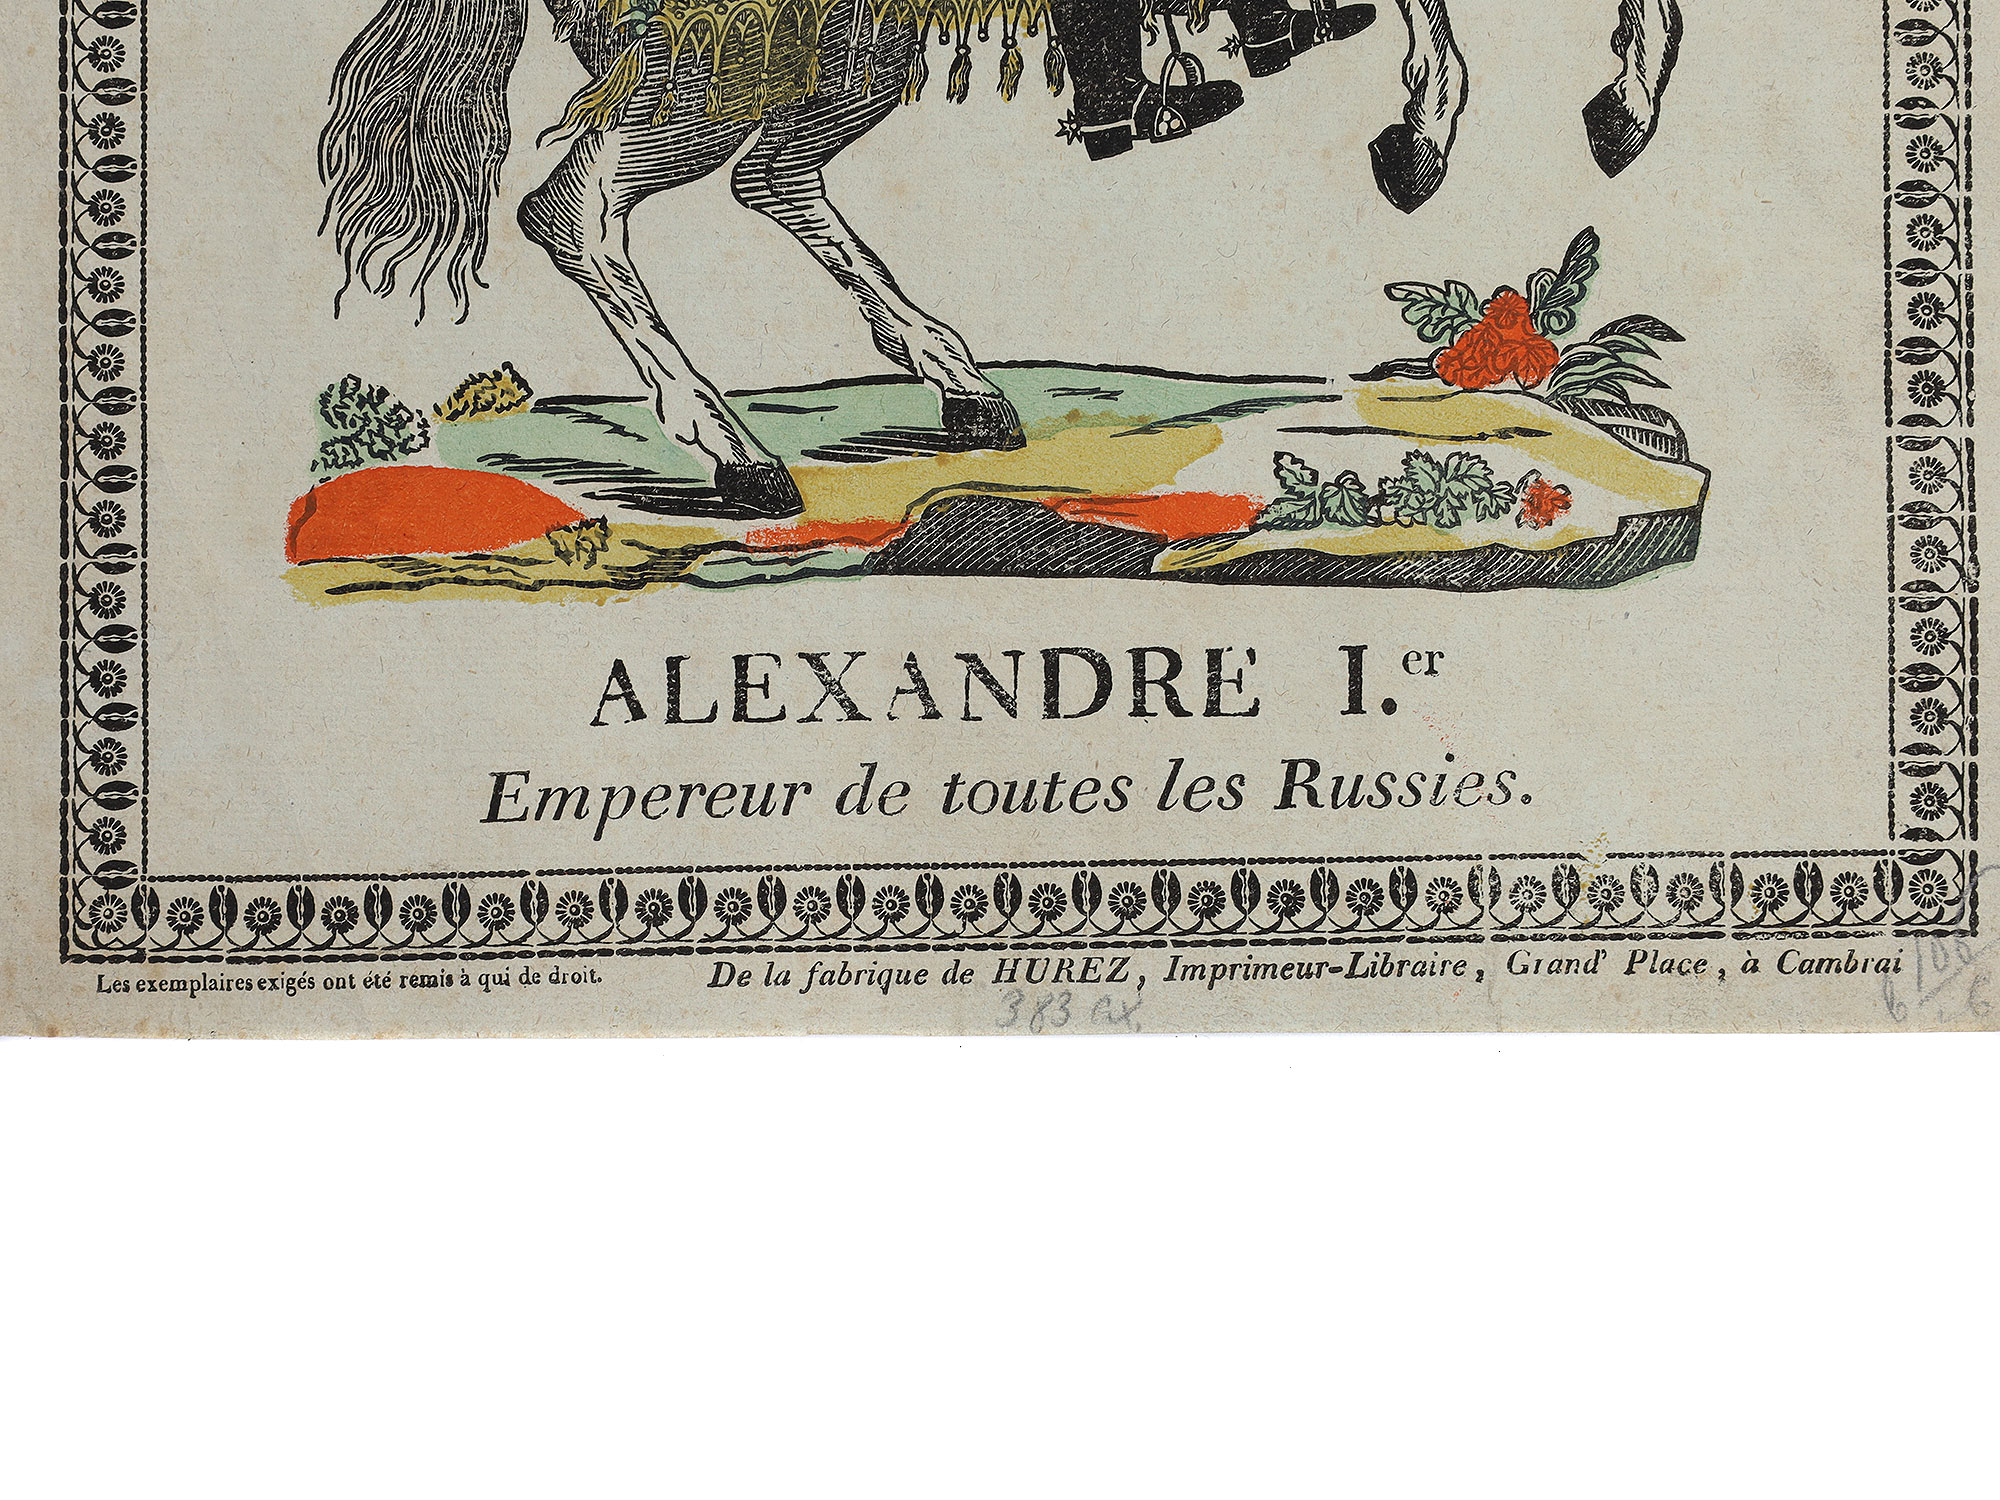 A HAND-COLORED LITHOGRAPH DEPICTING ALEXANFER I PIC-1